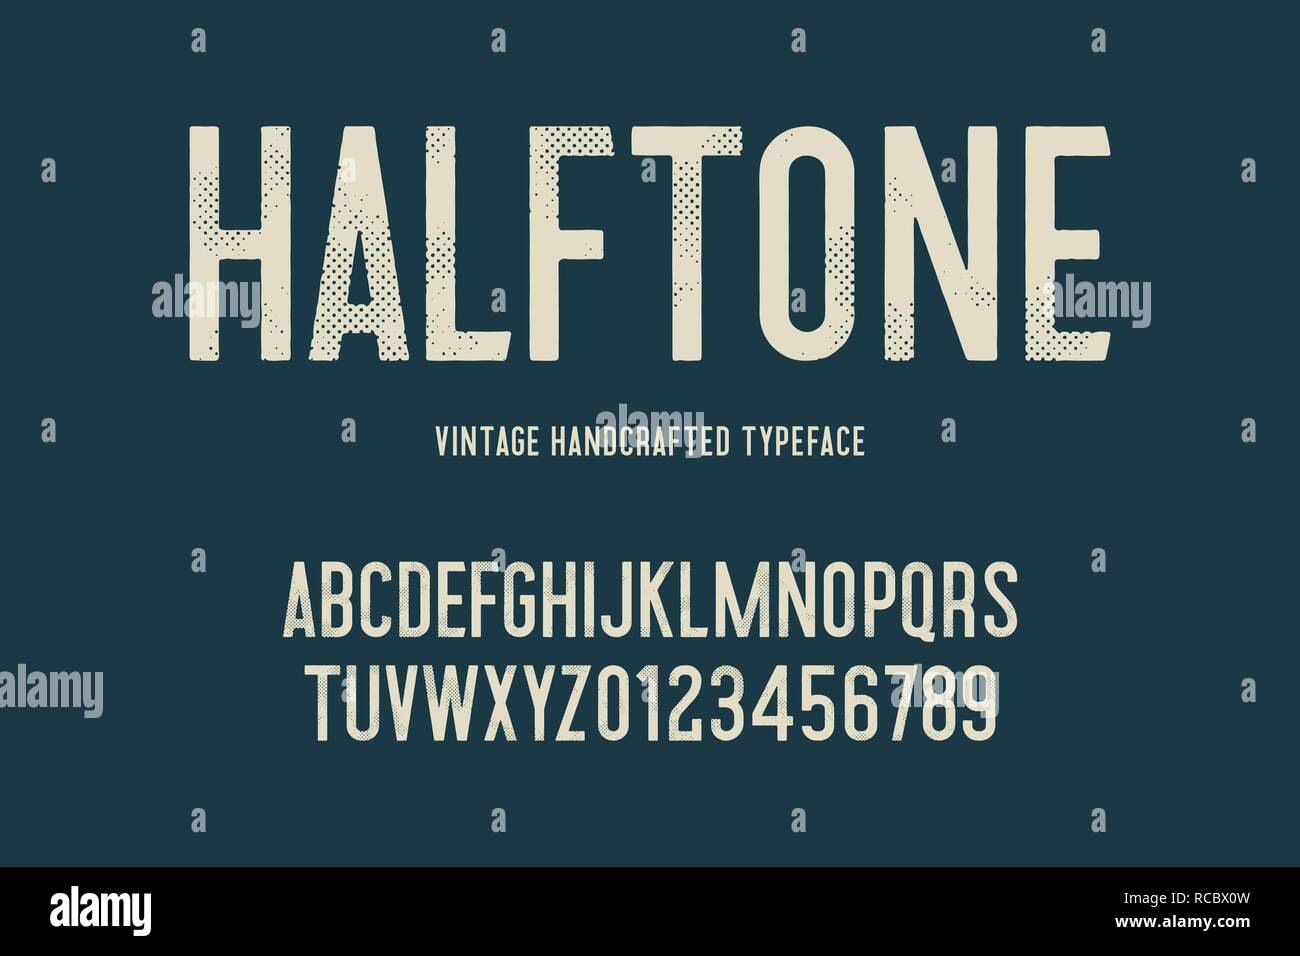 vintage handcrafted typeface with halftone effect. grunge letters. vector illustration Stock Vector